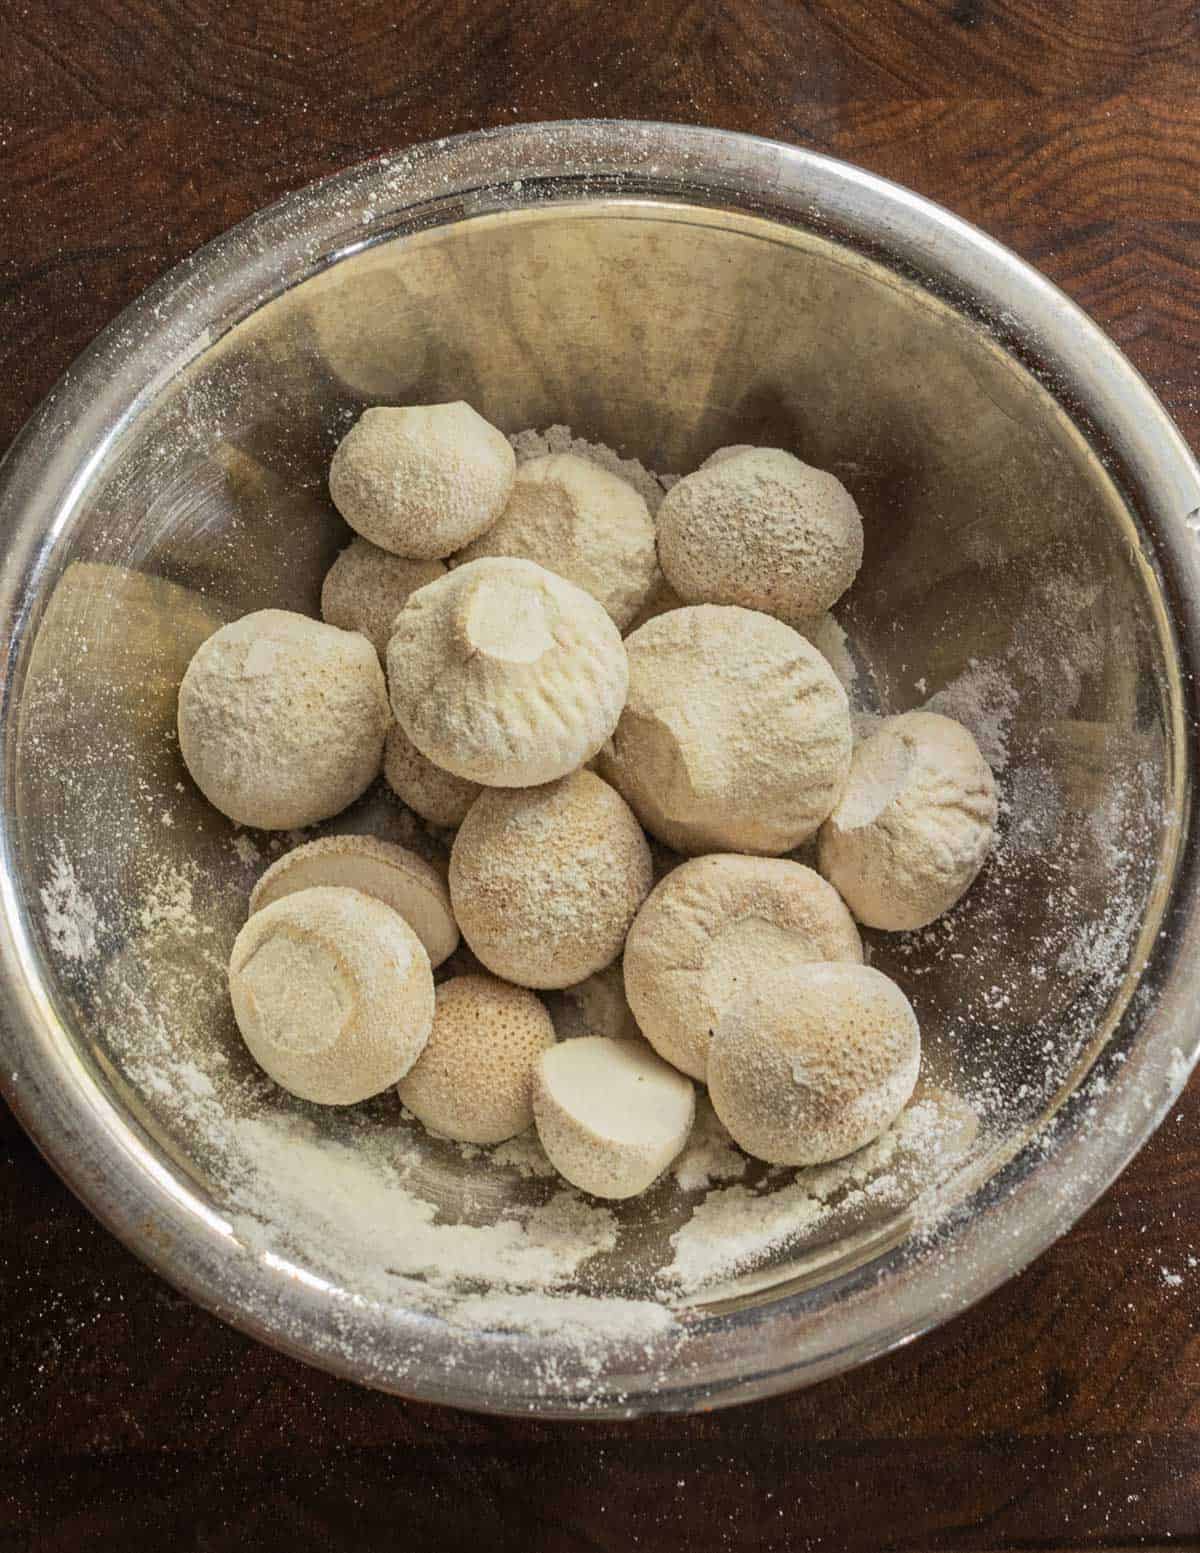 Tossing gem puffball mushrooms lightly in flour before frying. Tossing mushrooms lightly in flour before frying.